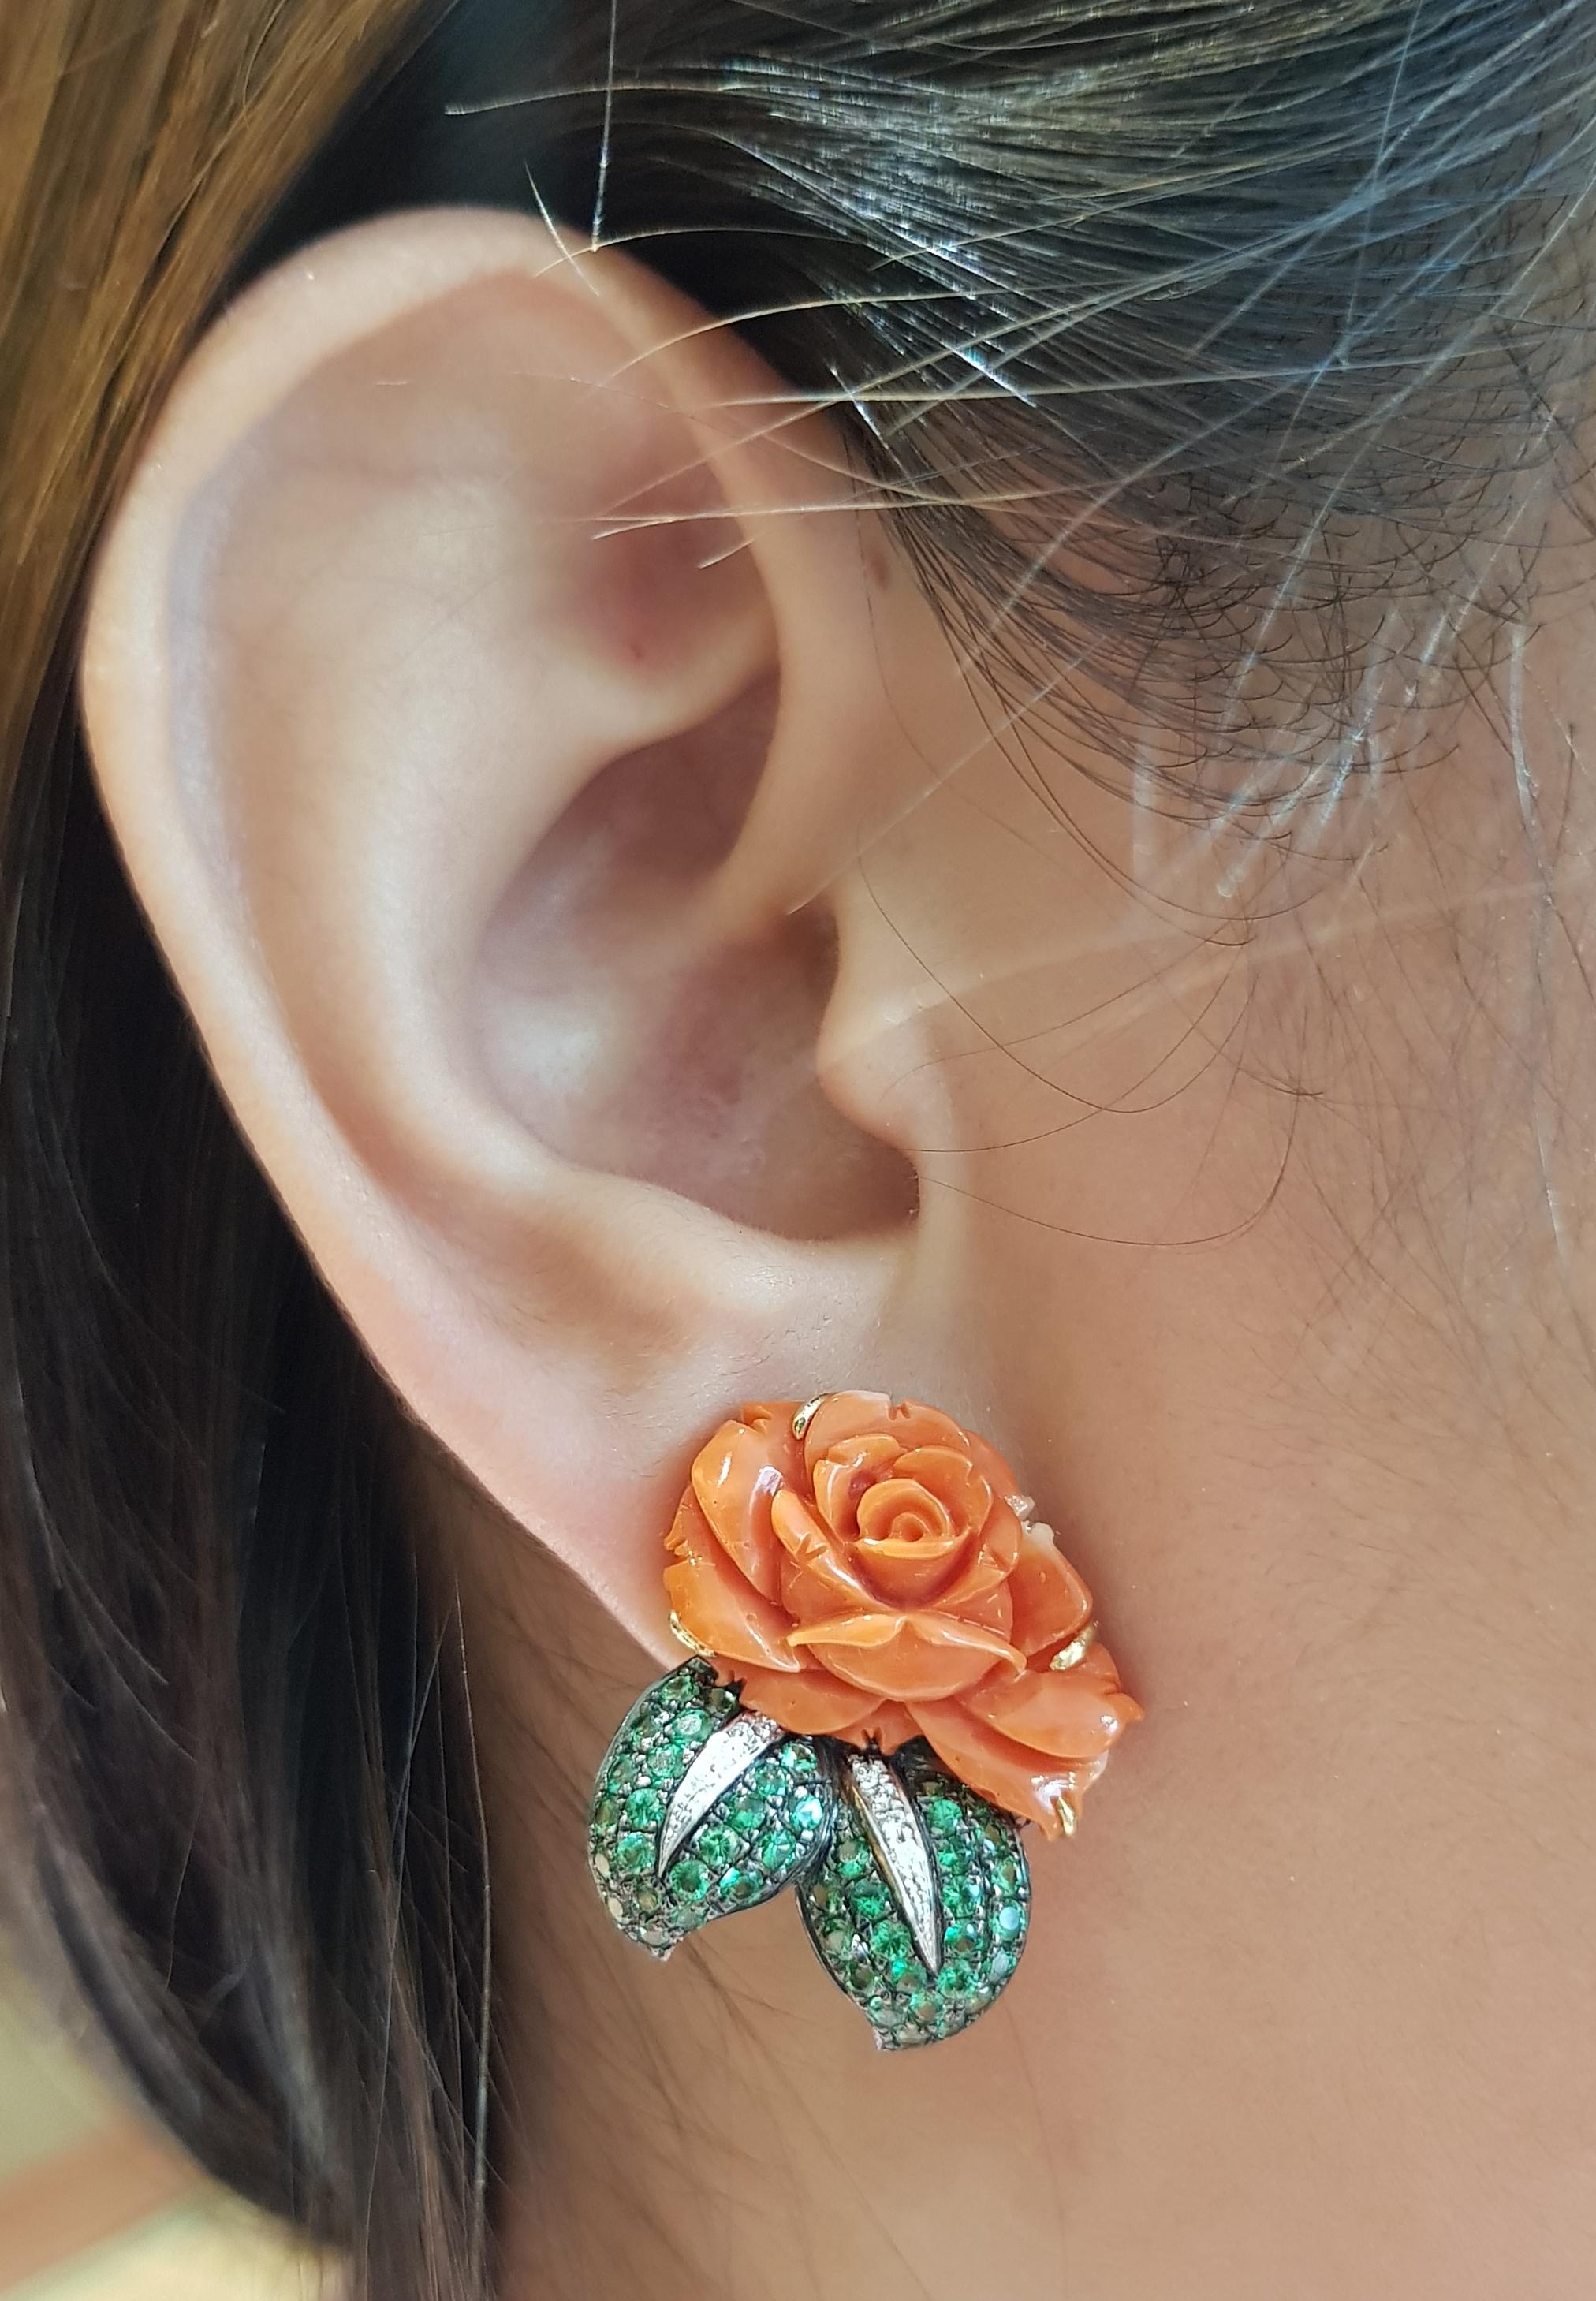 Coral 3.16 carats with Tsavorite 1.86 carats and Diamond 0.11 carat Earrings set in 18 Karat Gold Settings

Width:  2.1 cm 
Length: 2.8 cm
Total Weight: 13.99 grams

